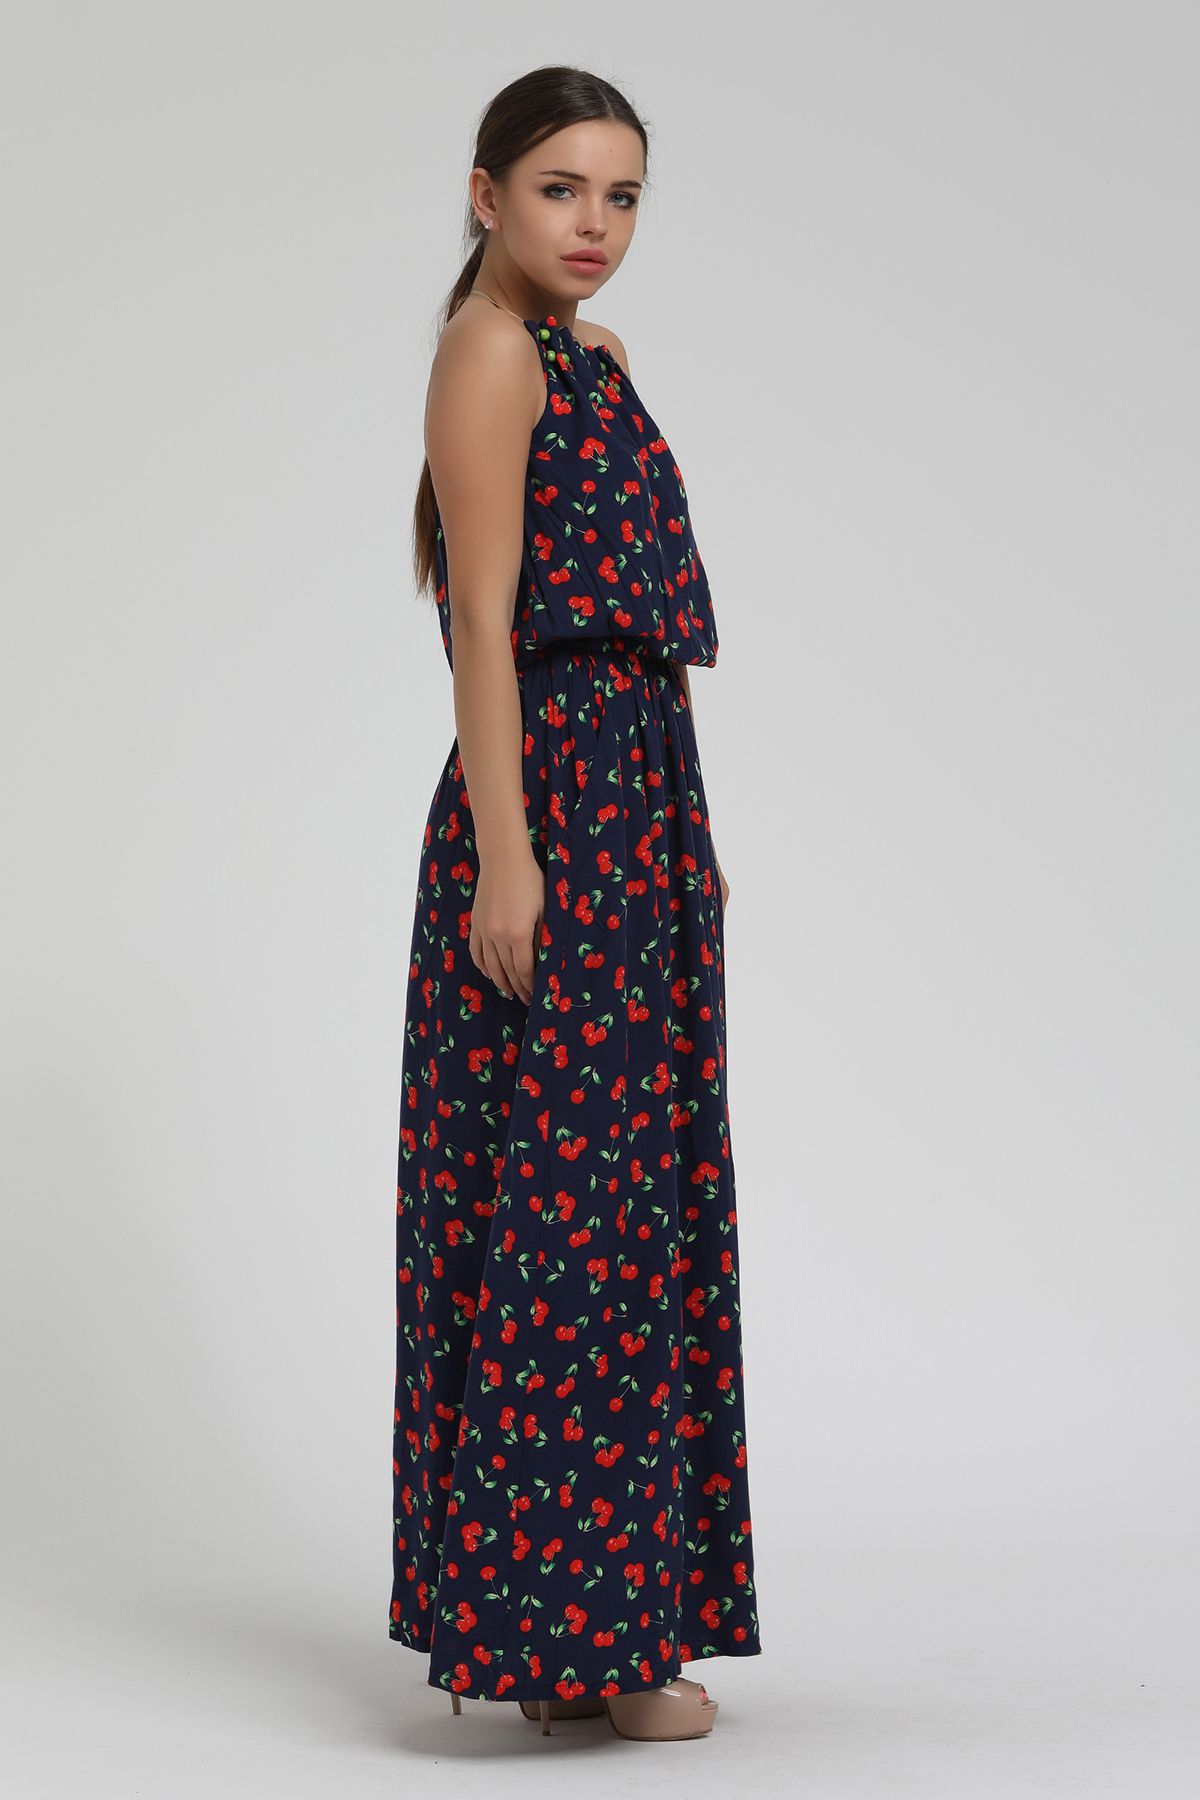 Picture of Cherry Patterned shoulders Light Long Maxi Dress